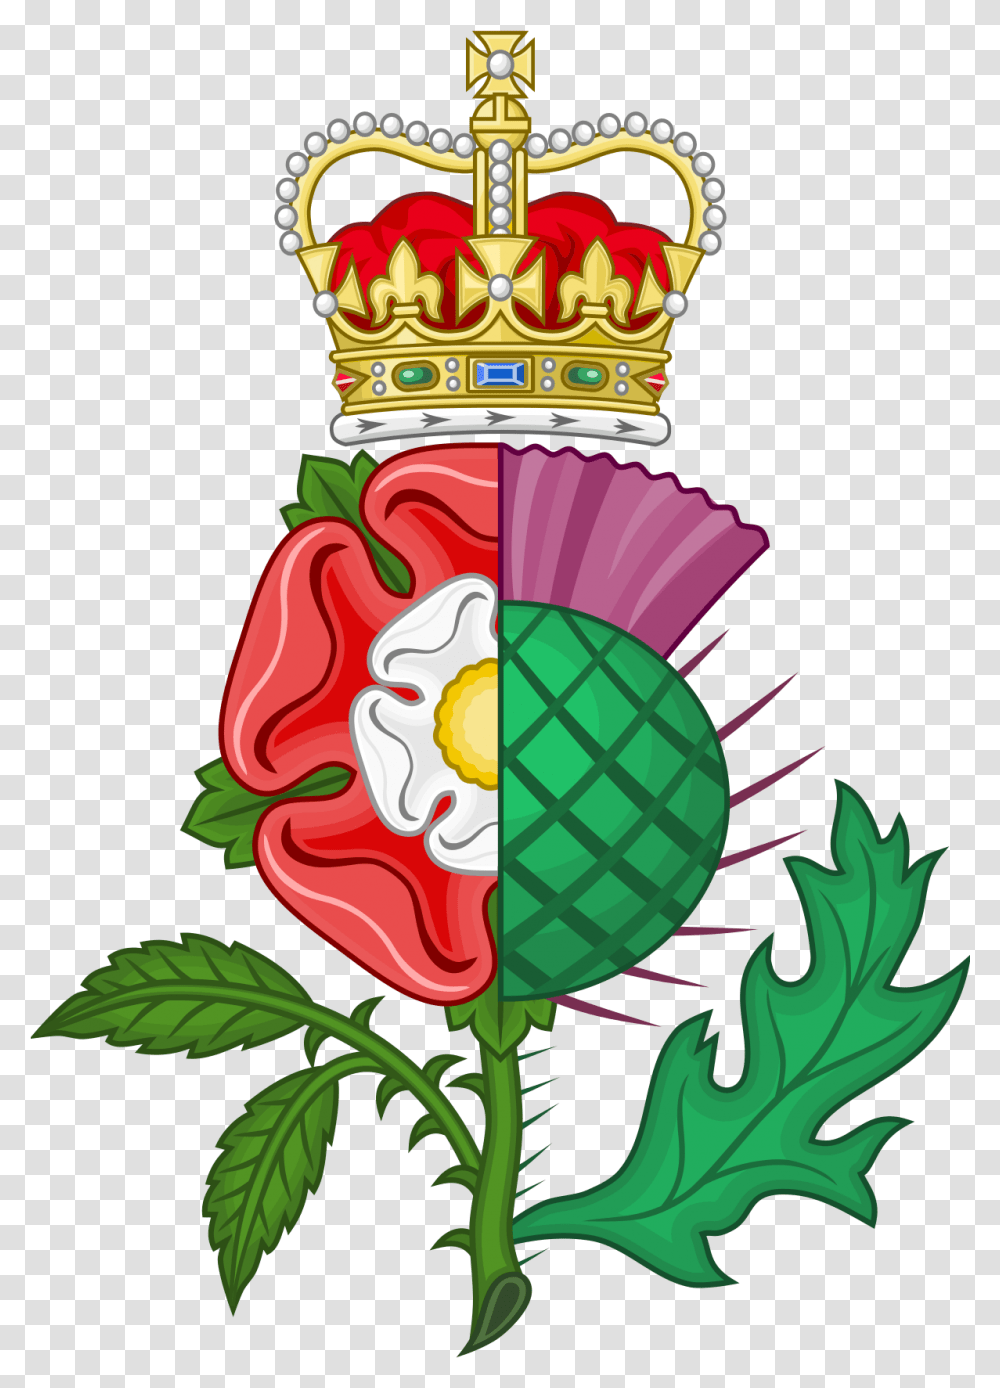 Fileunion Of The Crowns Royal Badge Imperial Crownsvg Scottish Thistle Clipart, Plant, Accessories, Birthday Cake, Dessert Transparent Png